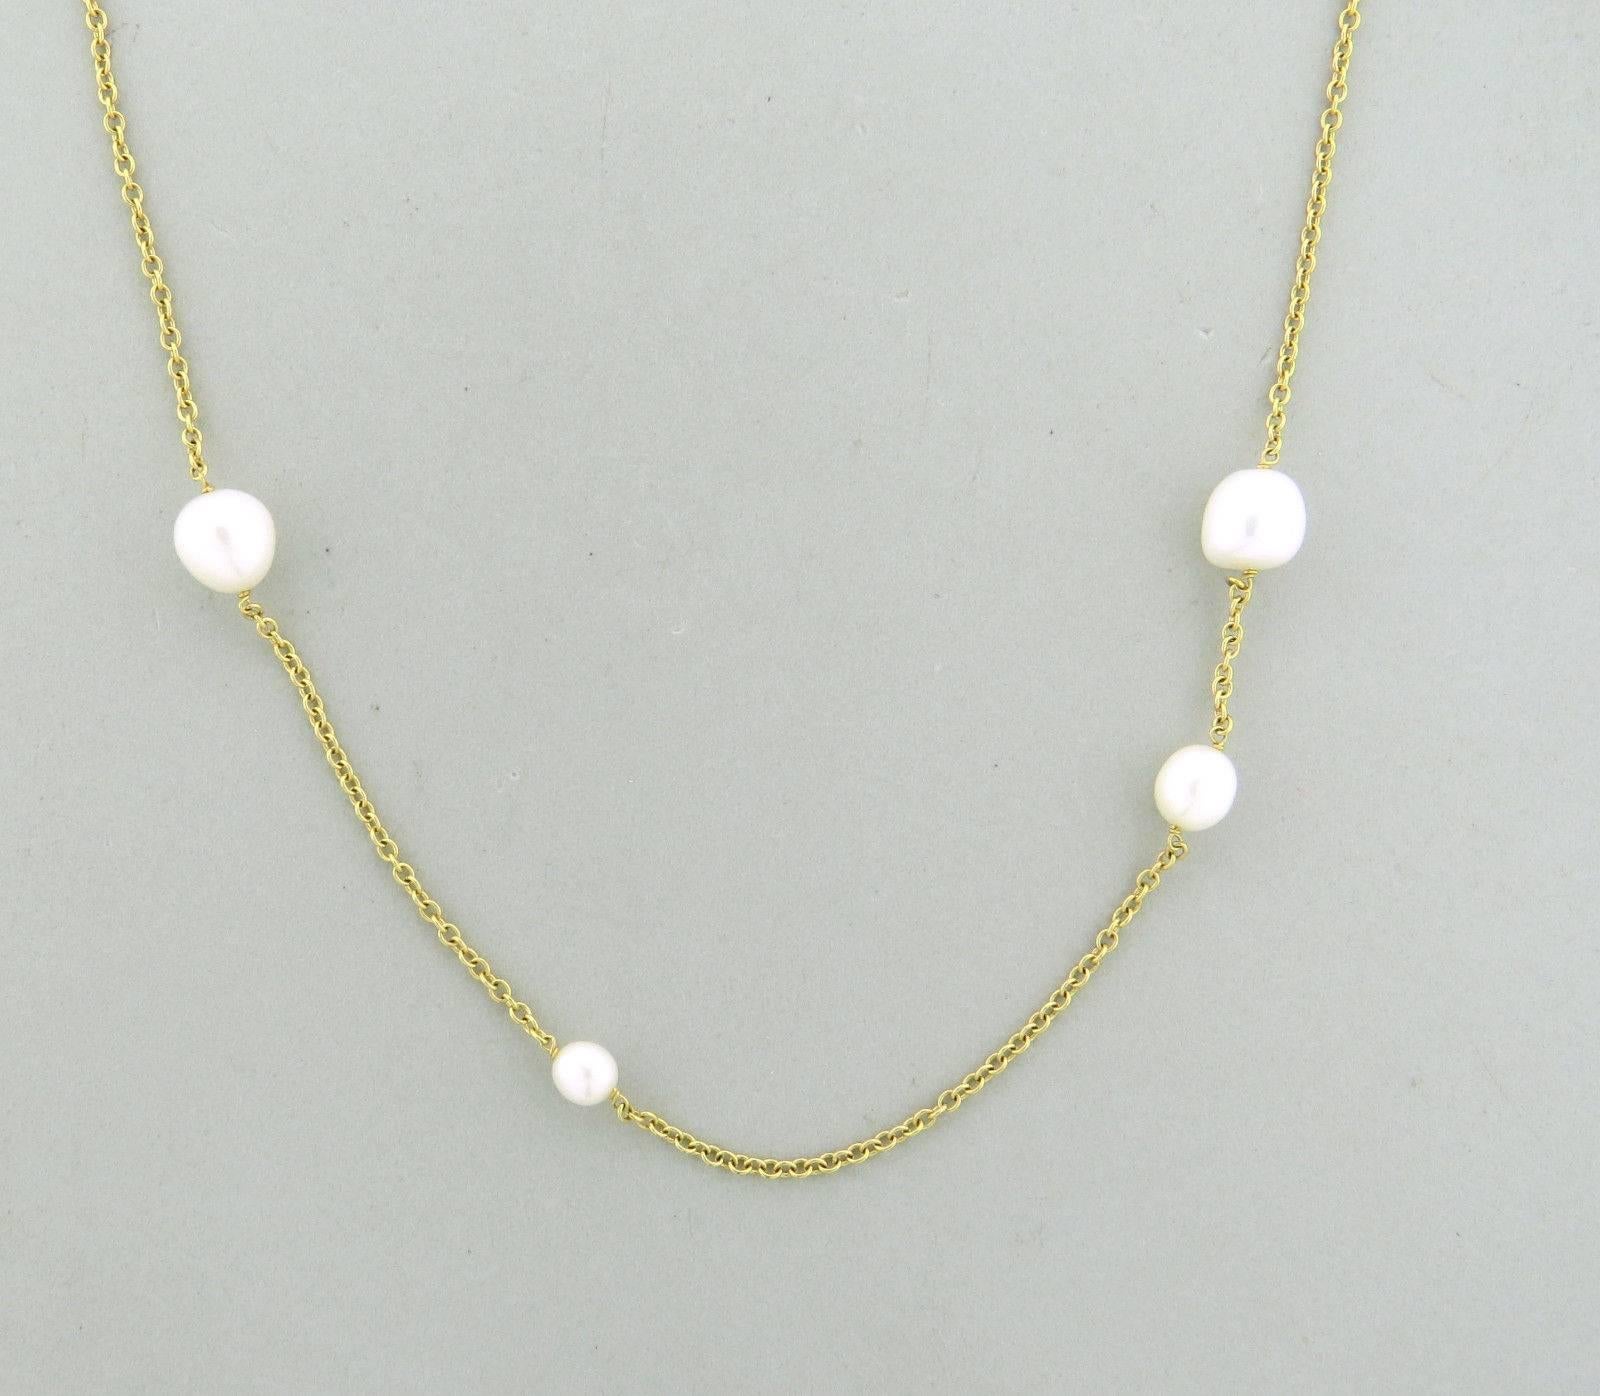 An 18k yellow gold necklace set with pearls ranging in size from 6.4mm to 10mm.  The necklace is 36